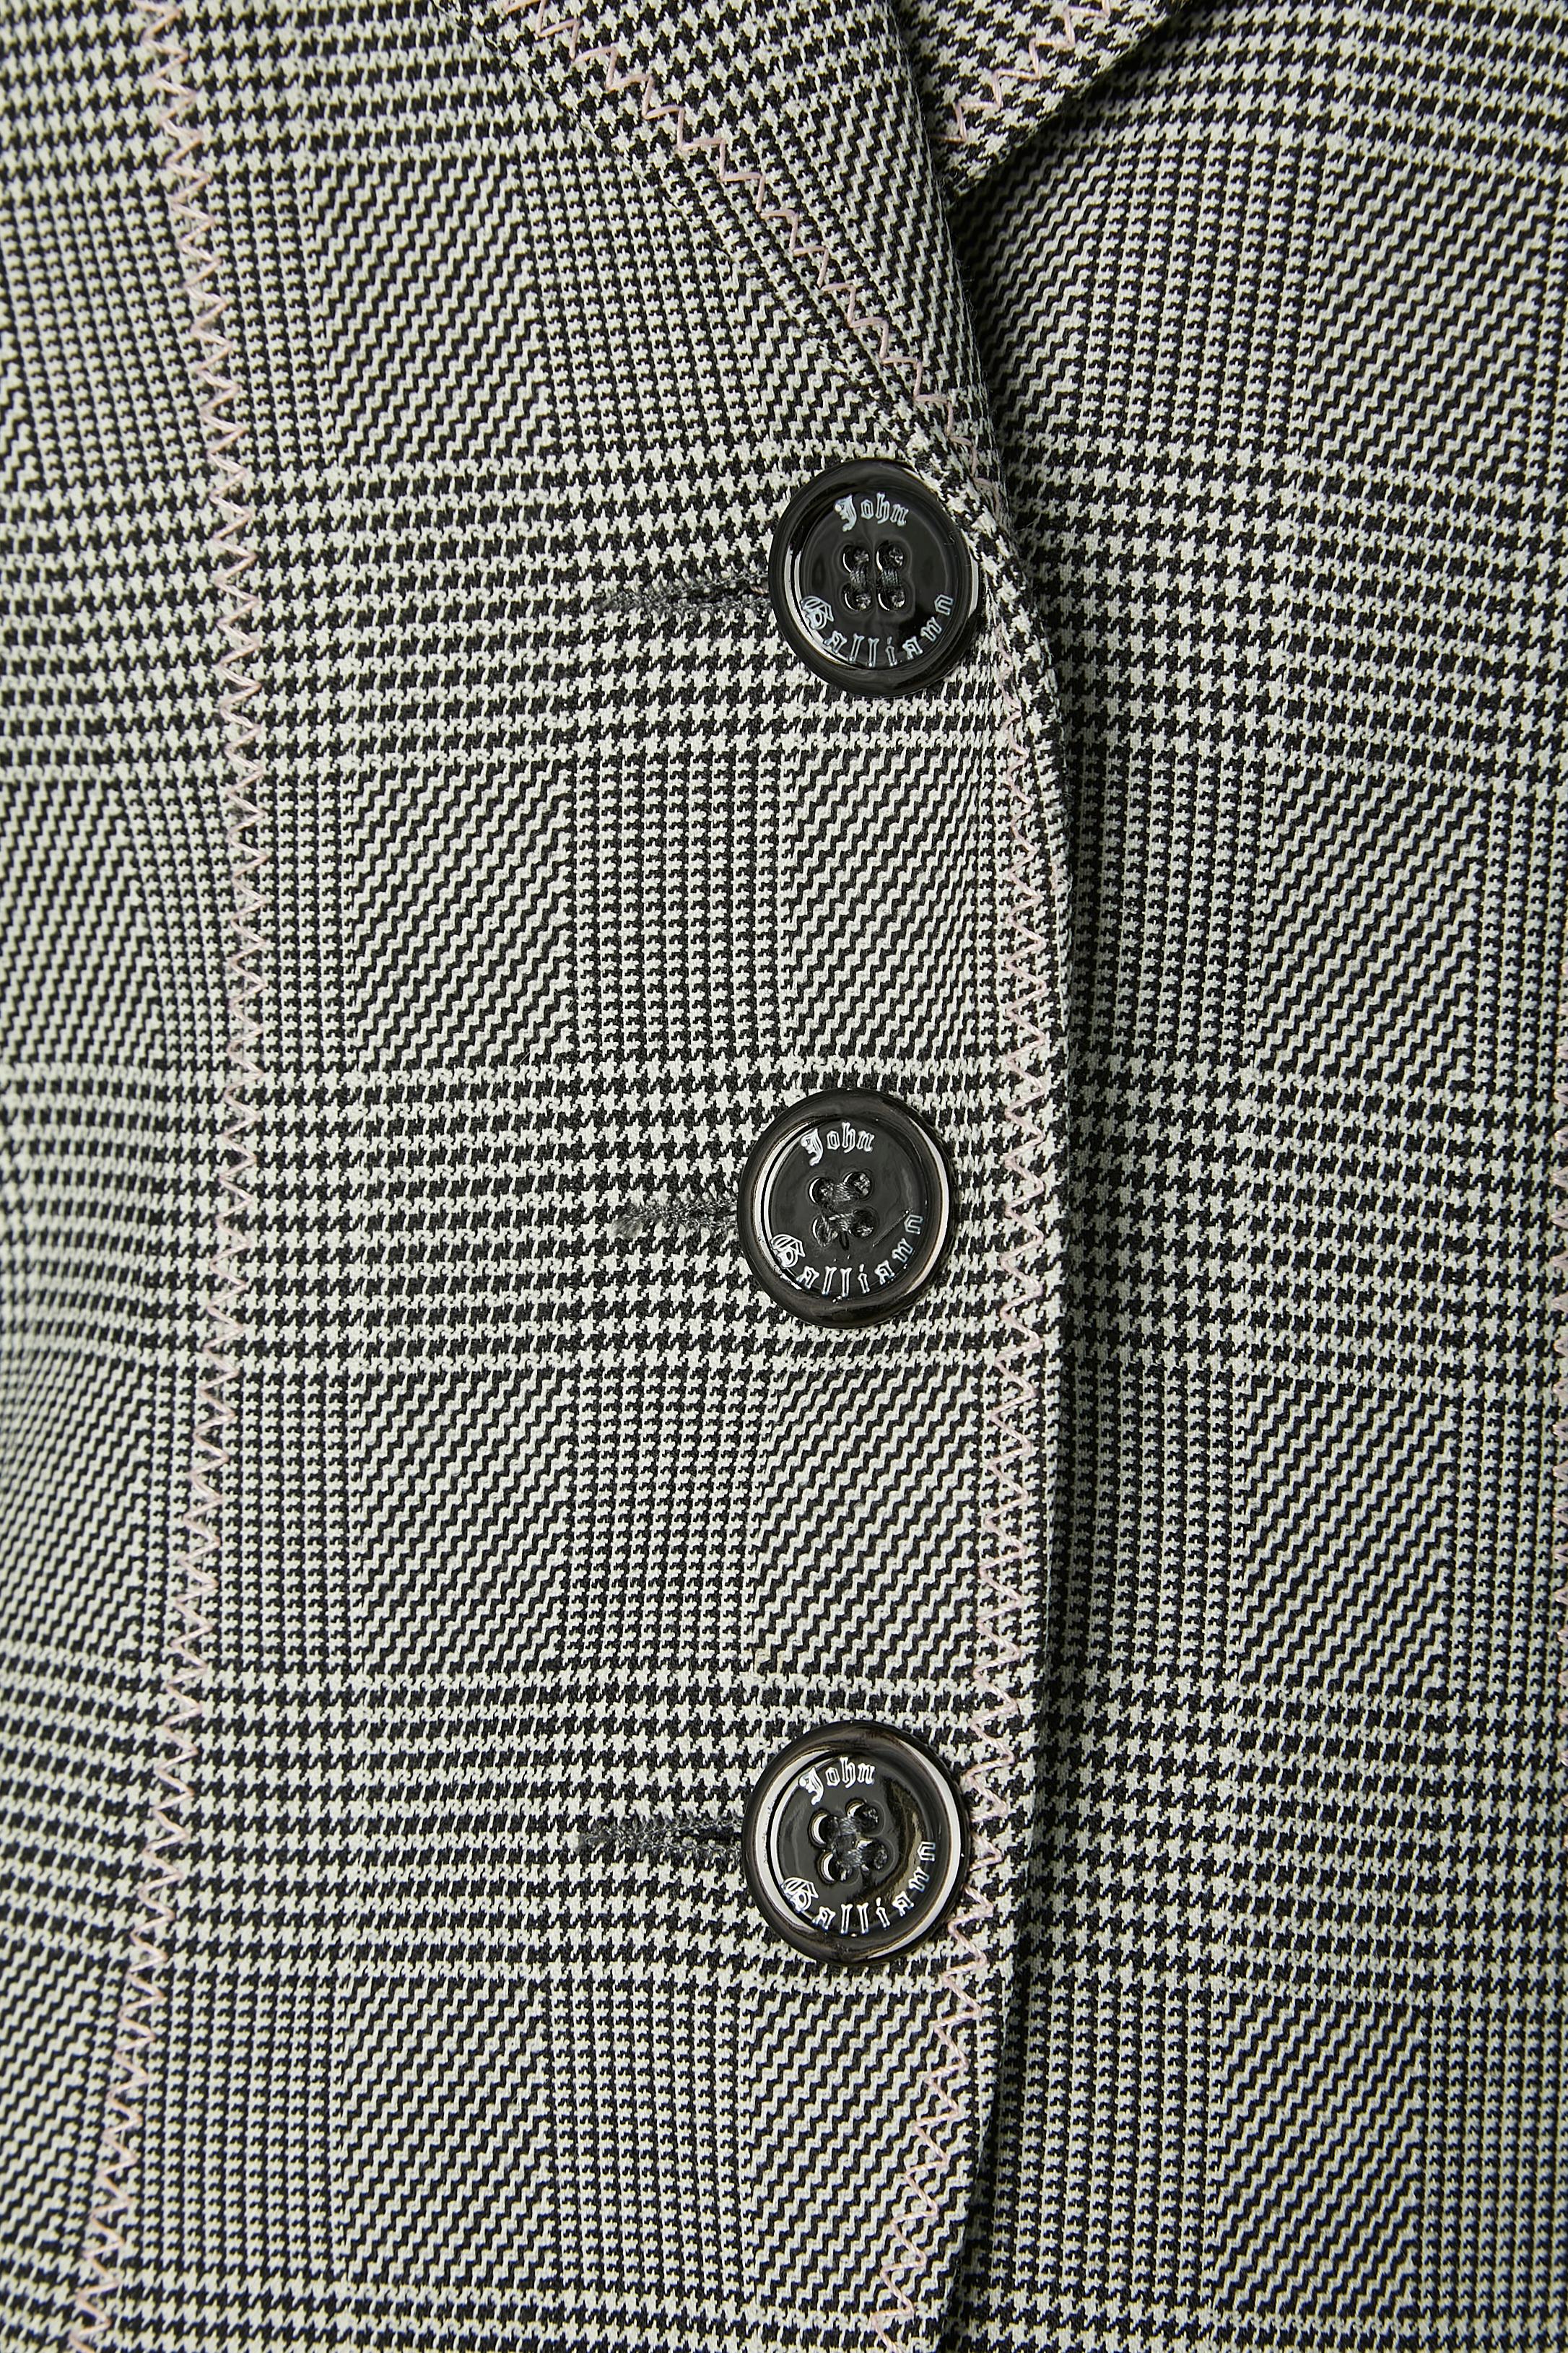 Prince of Wales pattern trouser-suit John Galliano  In Excellent Condition For Sale In Saint-Ouen-Sur-Seine, FR